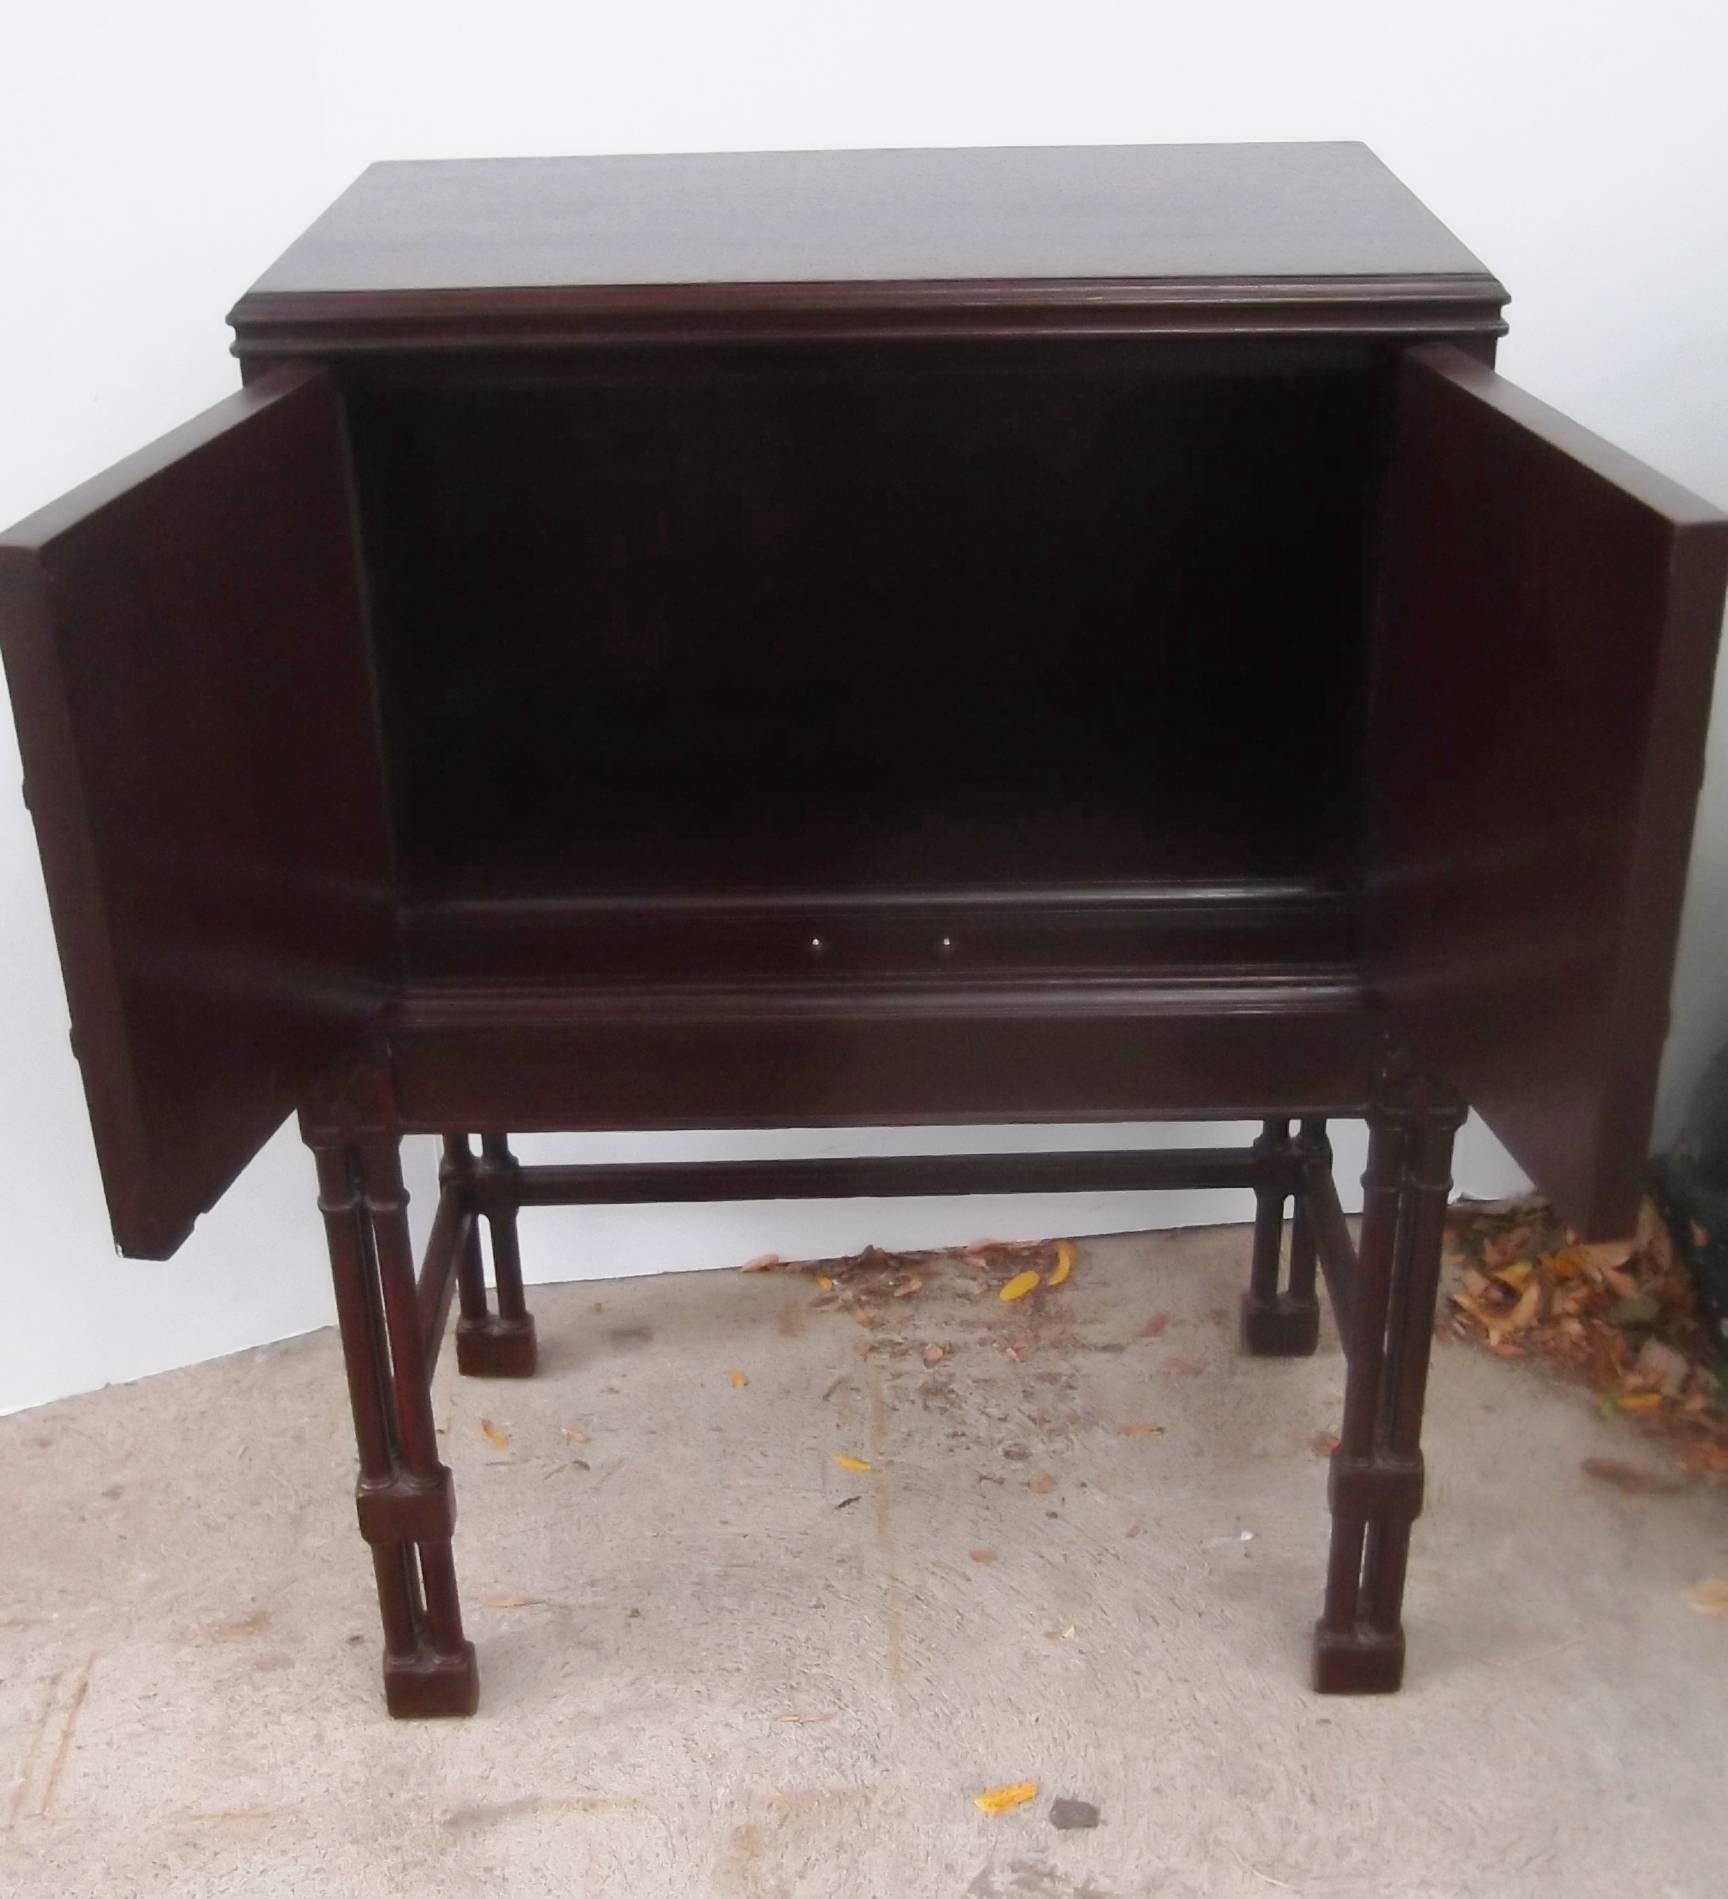 Edwardian Diminutive Chest on Stand in the Regency Style